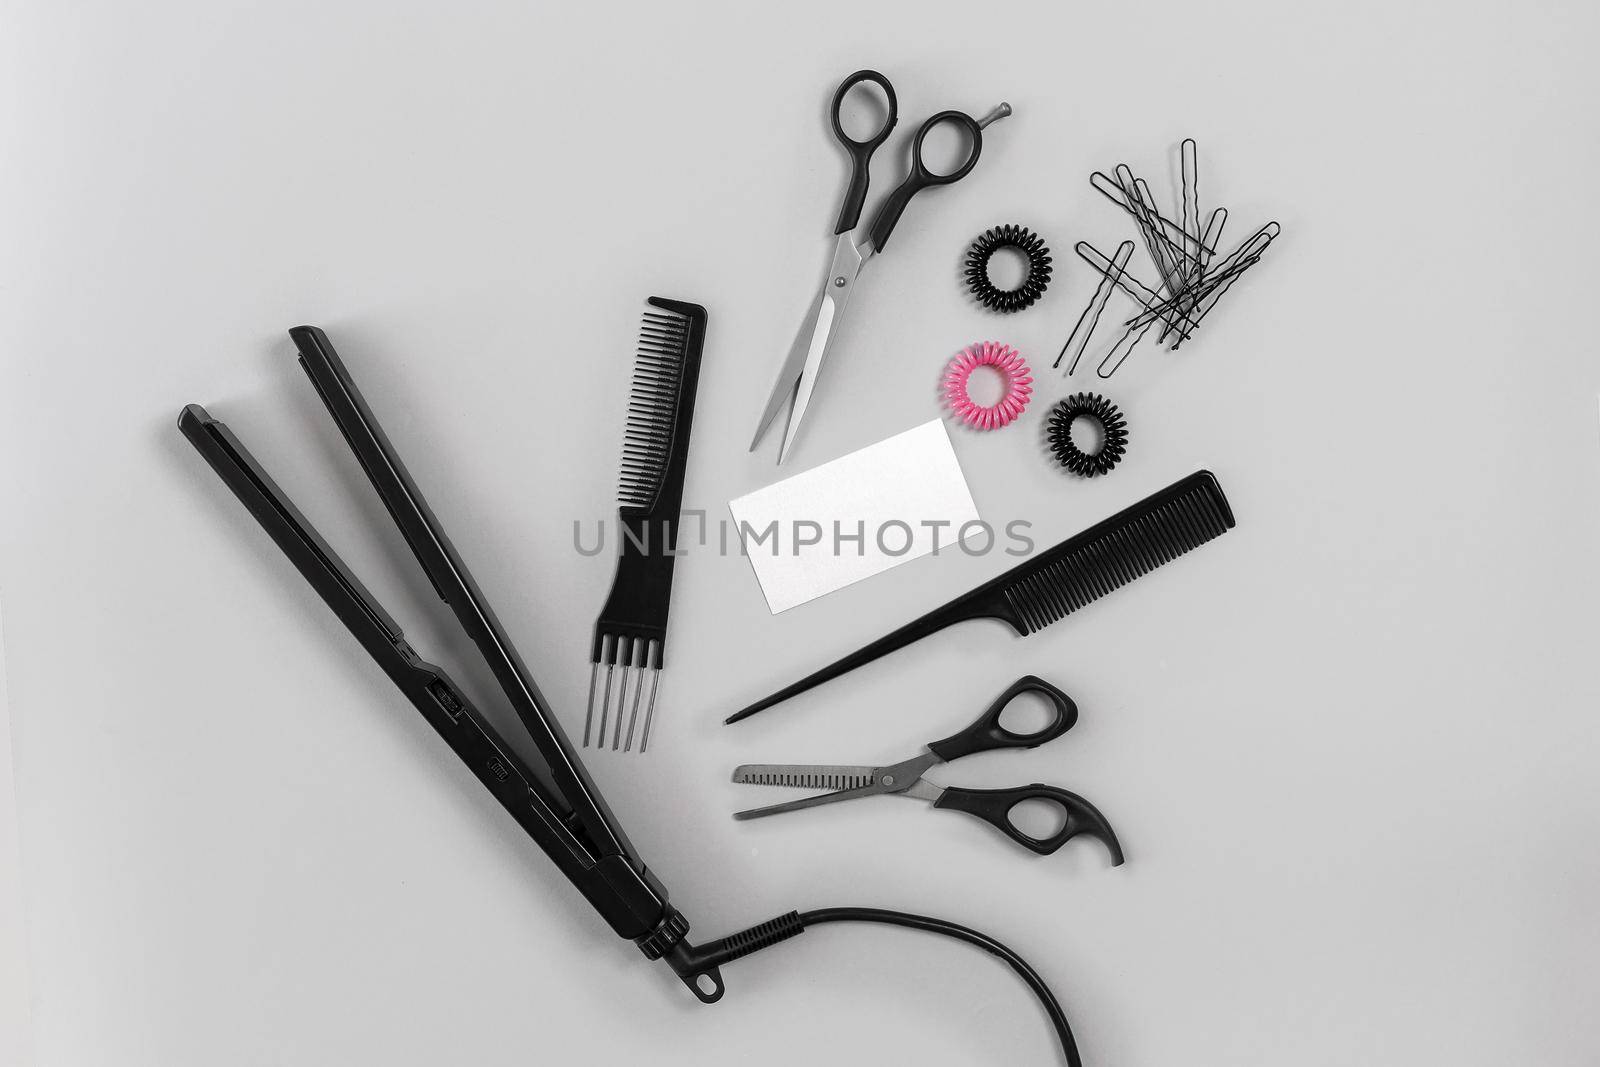 Hairdresser set with various accessories on gray background. Top view. Still life. Flat lay.